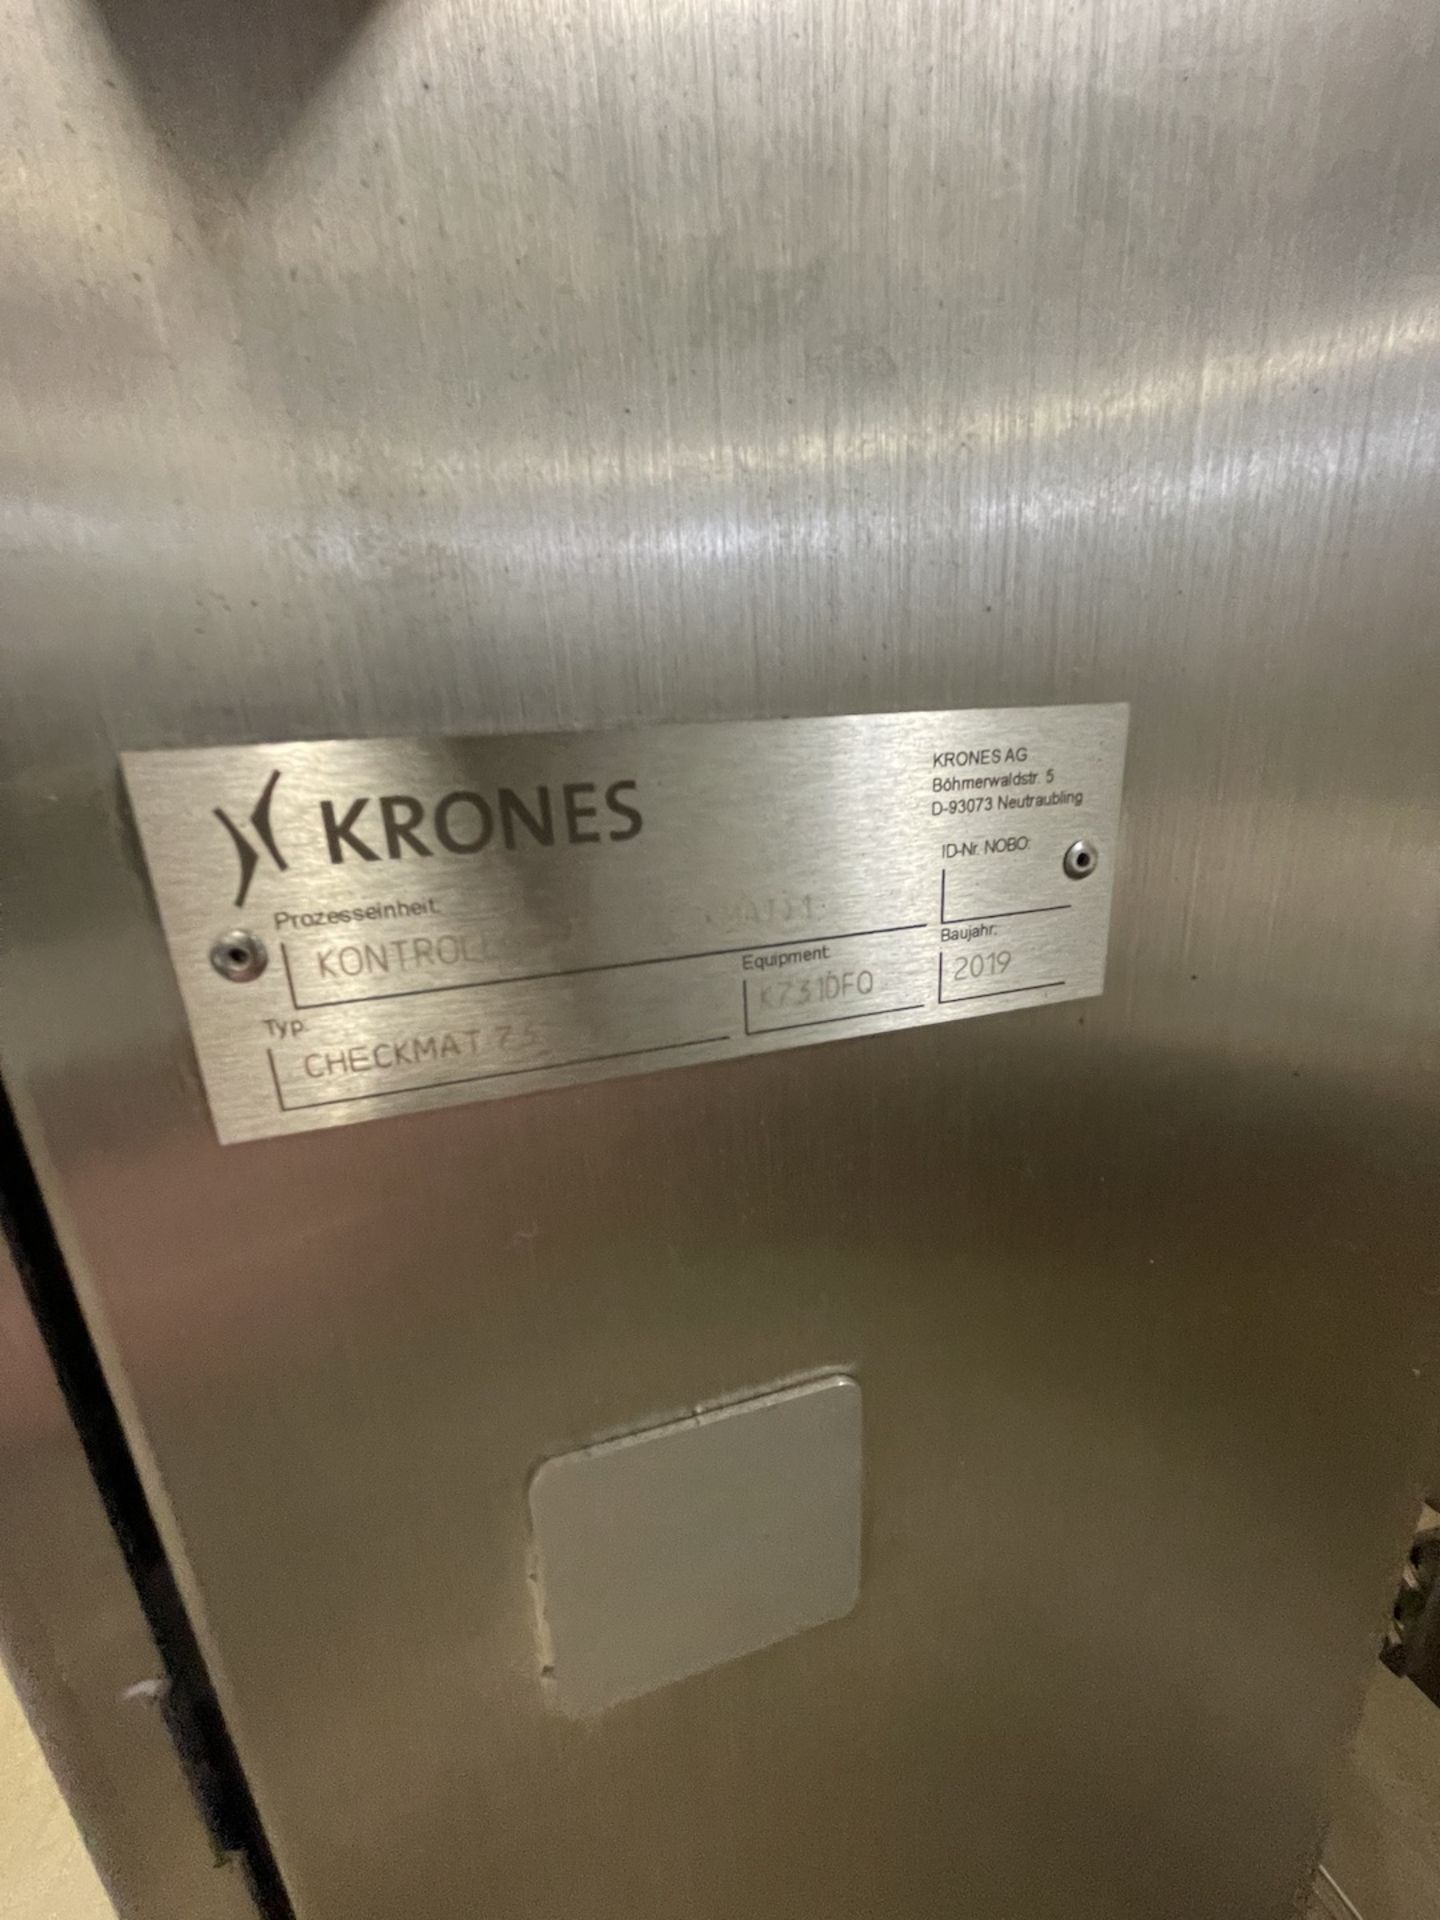 KRONES CHECKMAT INSPECTION SYSTEM, TYPE CHECKMAT 7.5 (2019 MFG) - Image 6 of 10